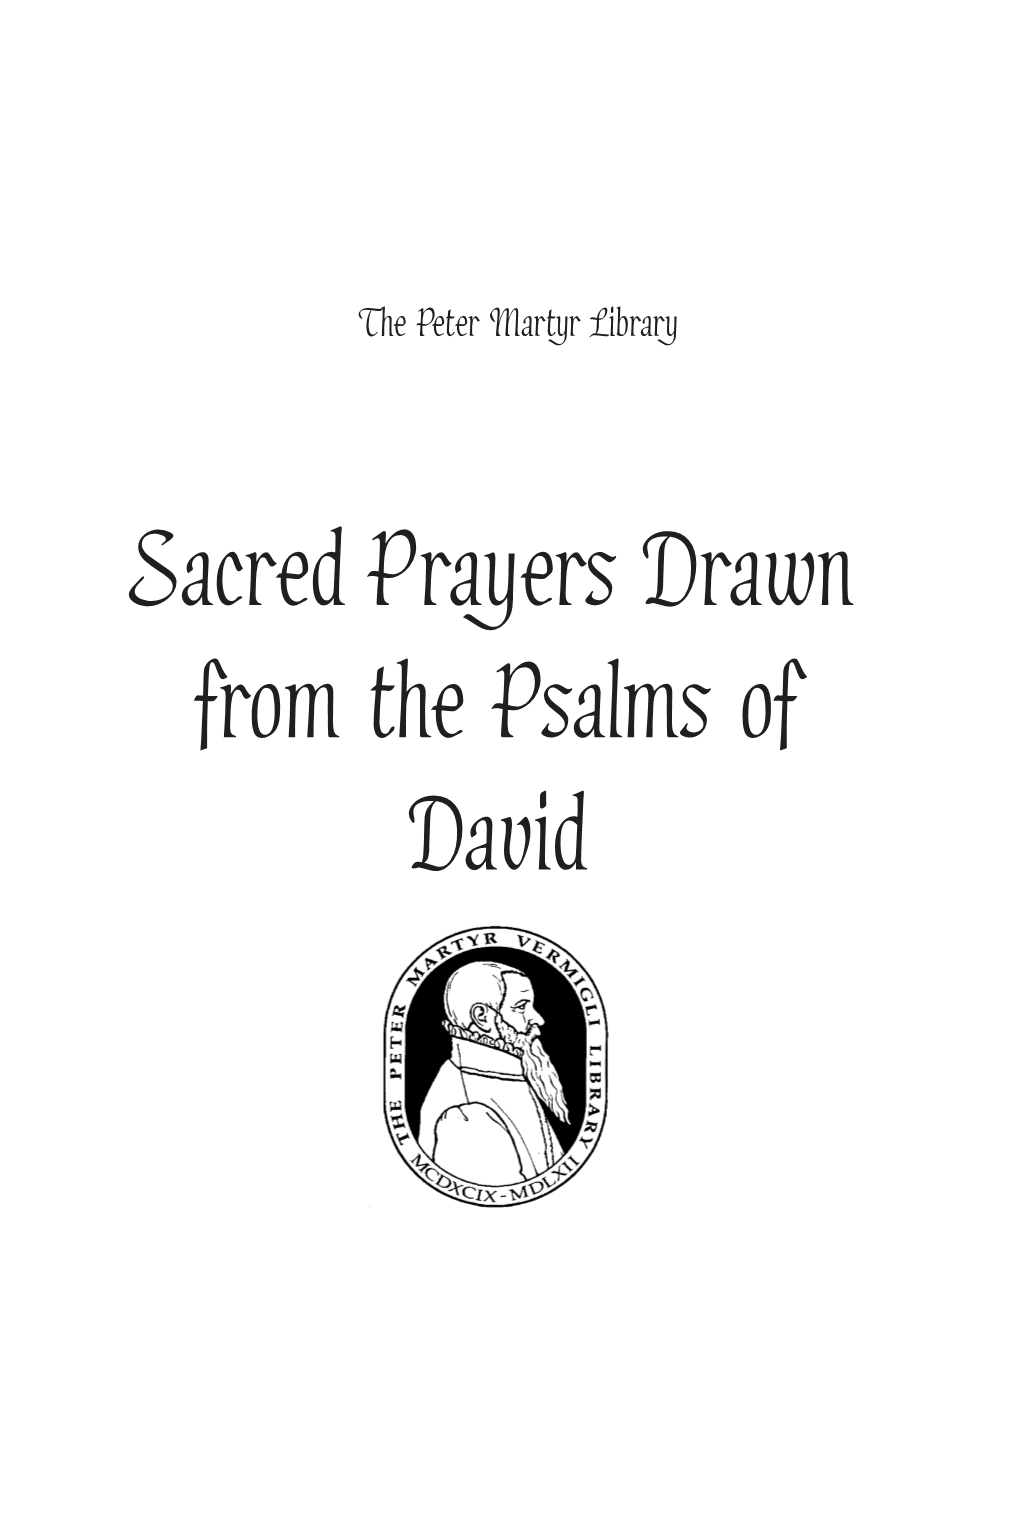 Sacred Prayers Drawn from the Psalms of David